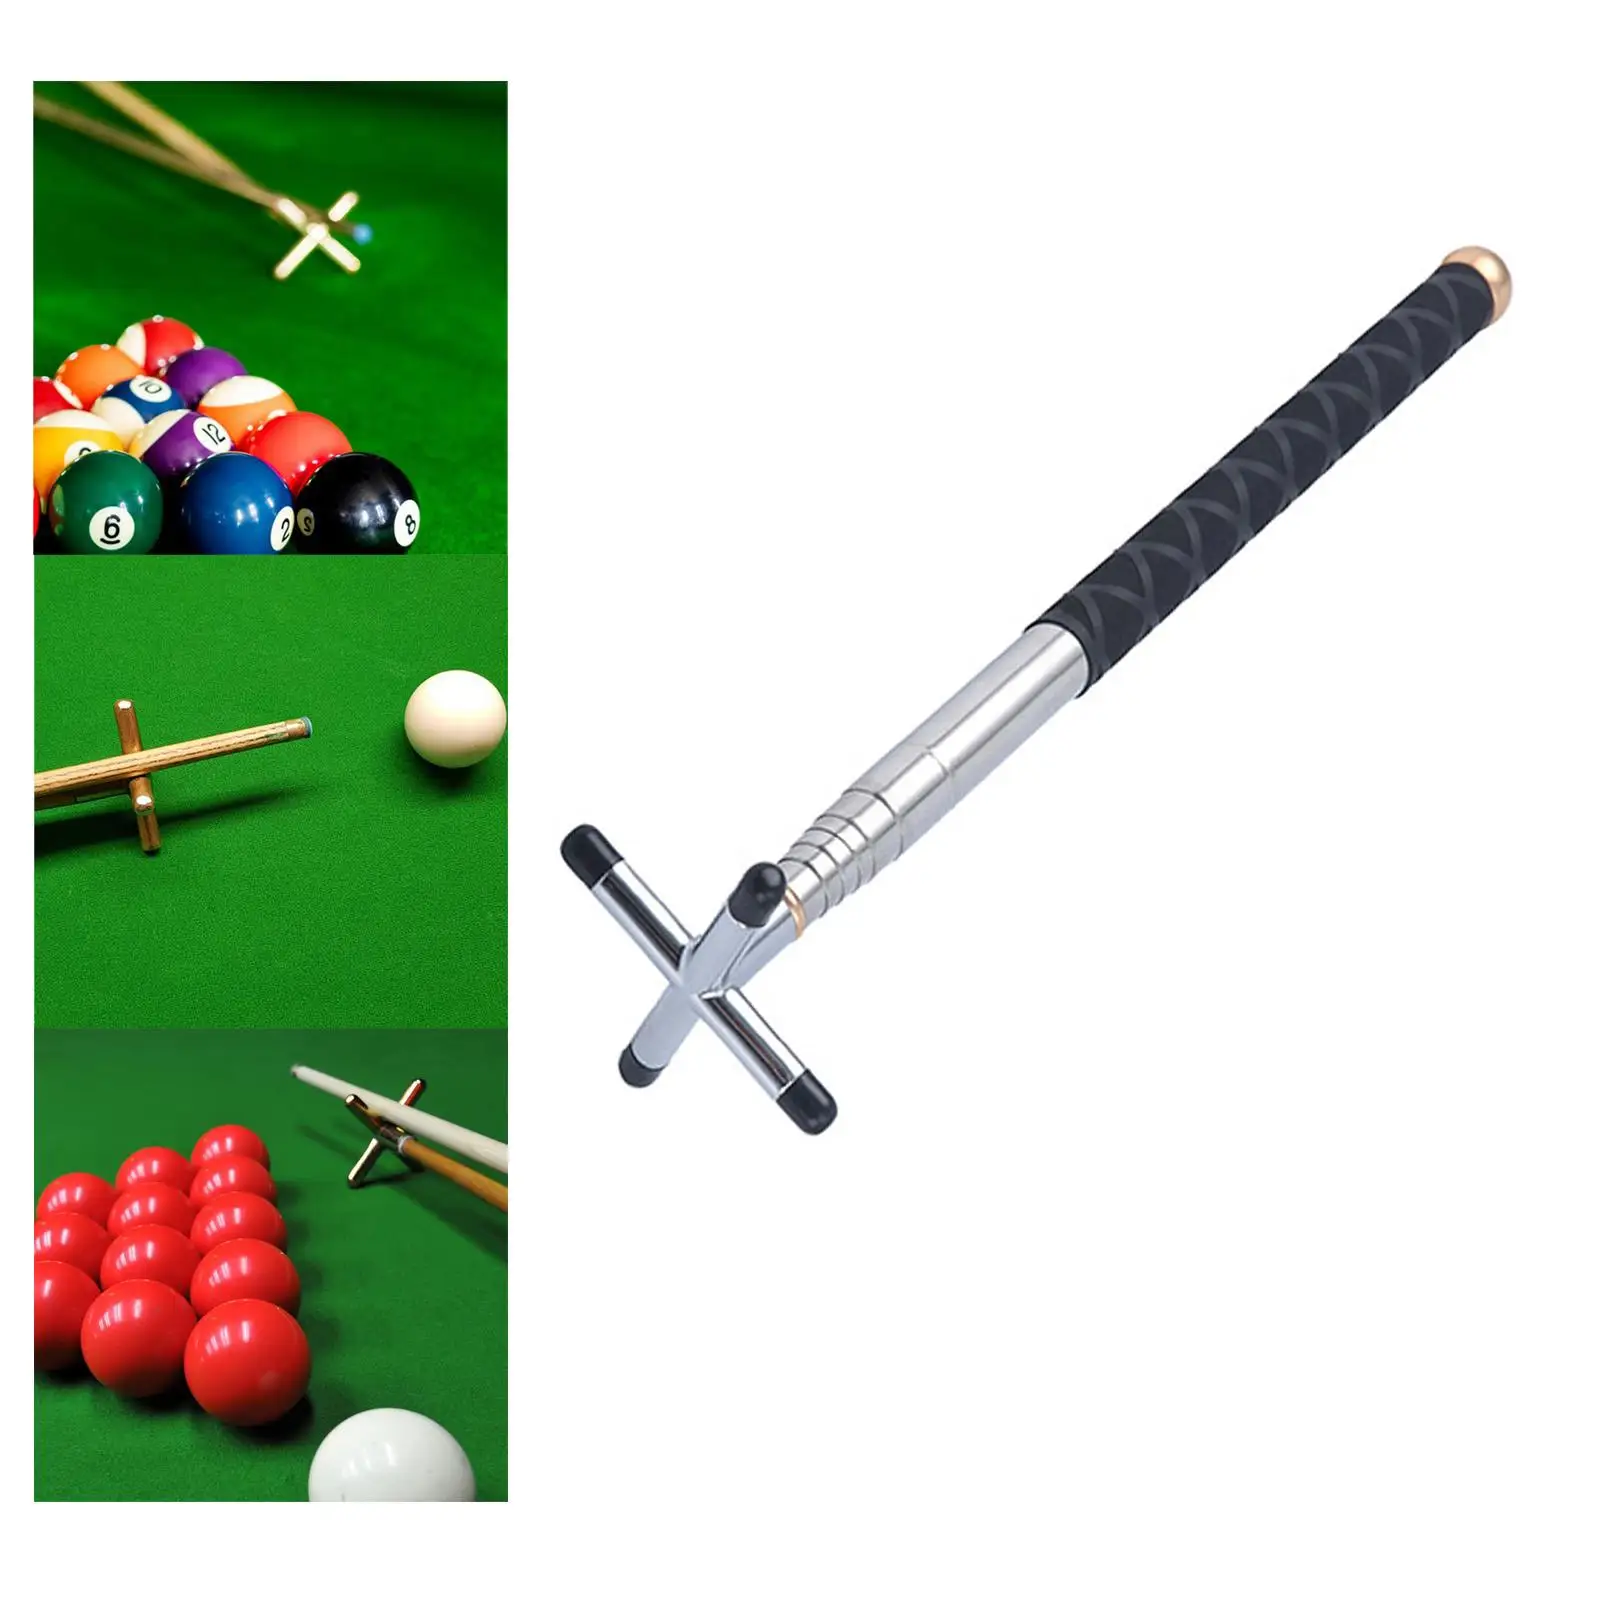 Retractable Billiards Cue Stick Bridge Bridge Head Stainless Steel Extender for Pool Table Training Competition Accessory